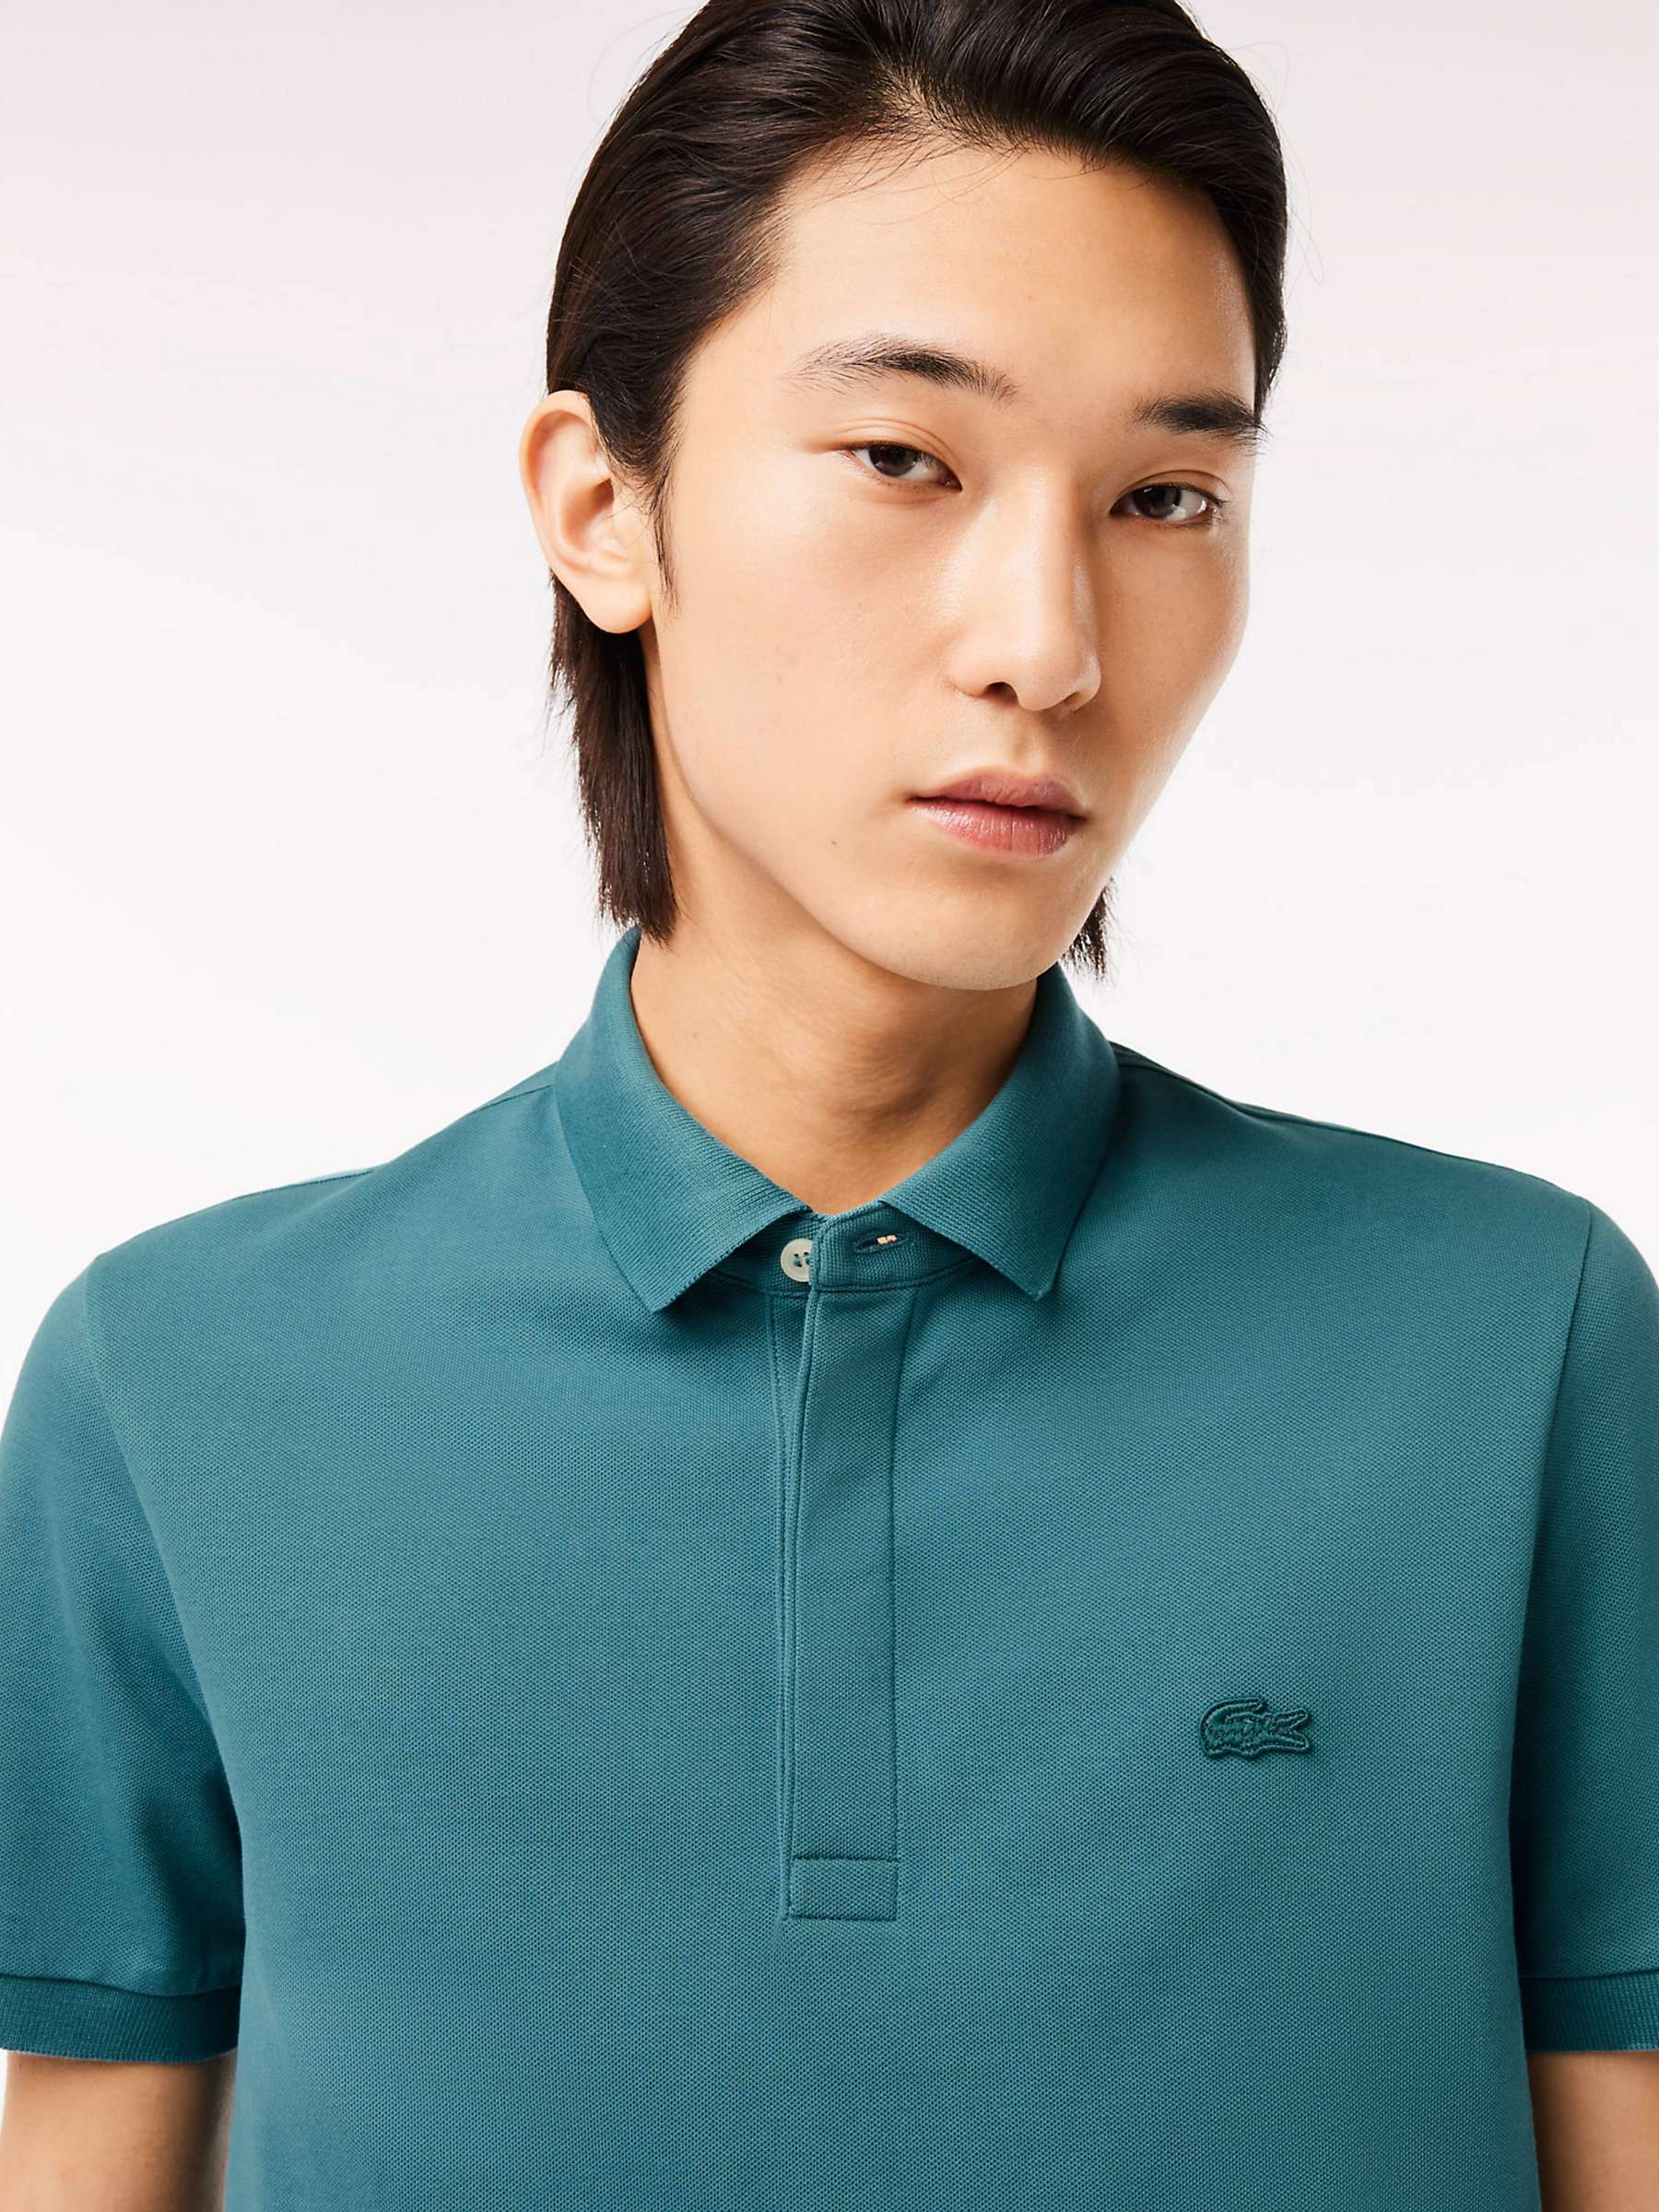 Buy Lacoste Core Essential Polo Shirt, Green Online at johnlewis.com